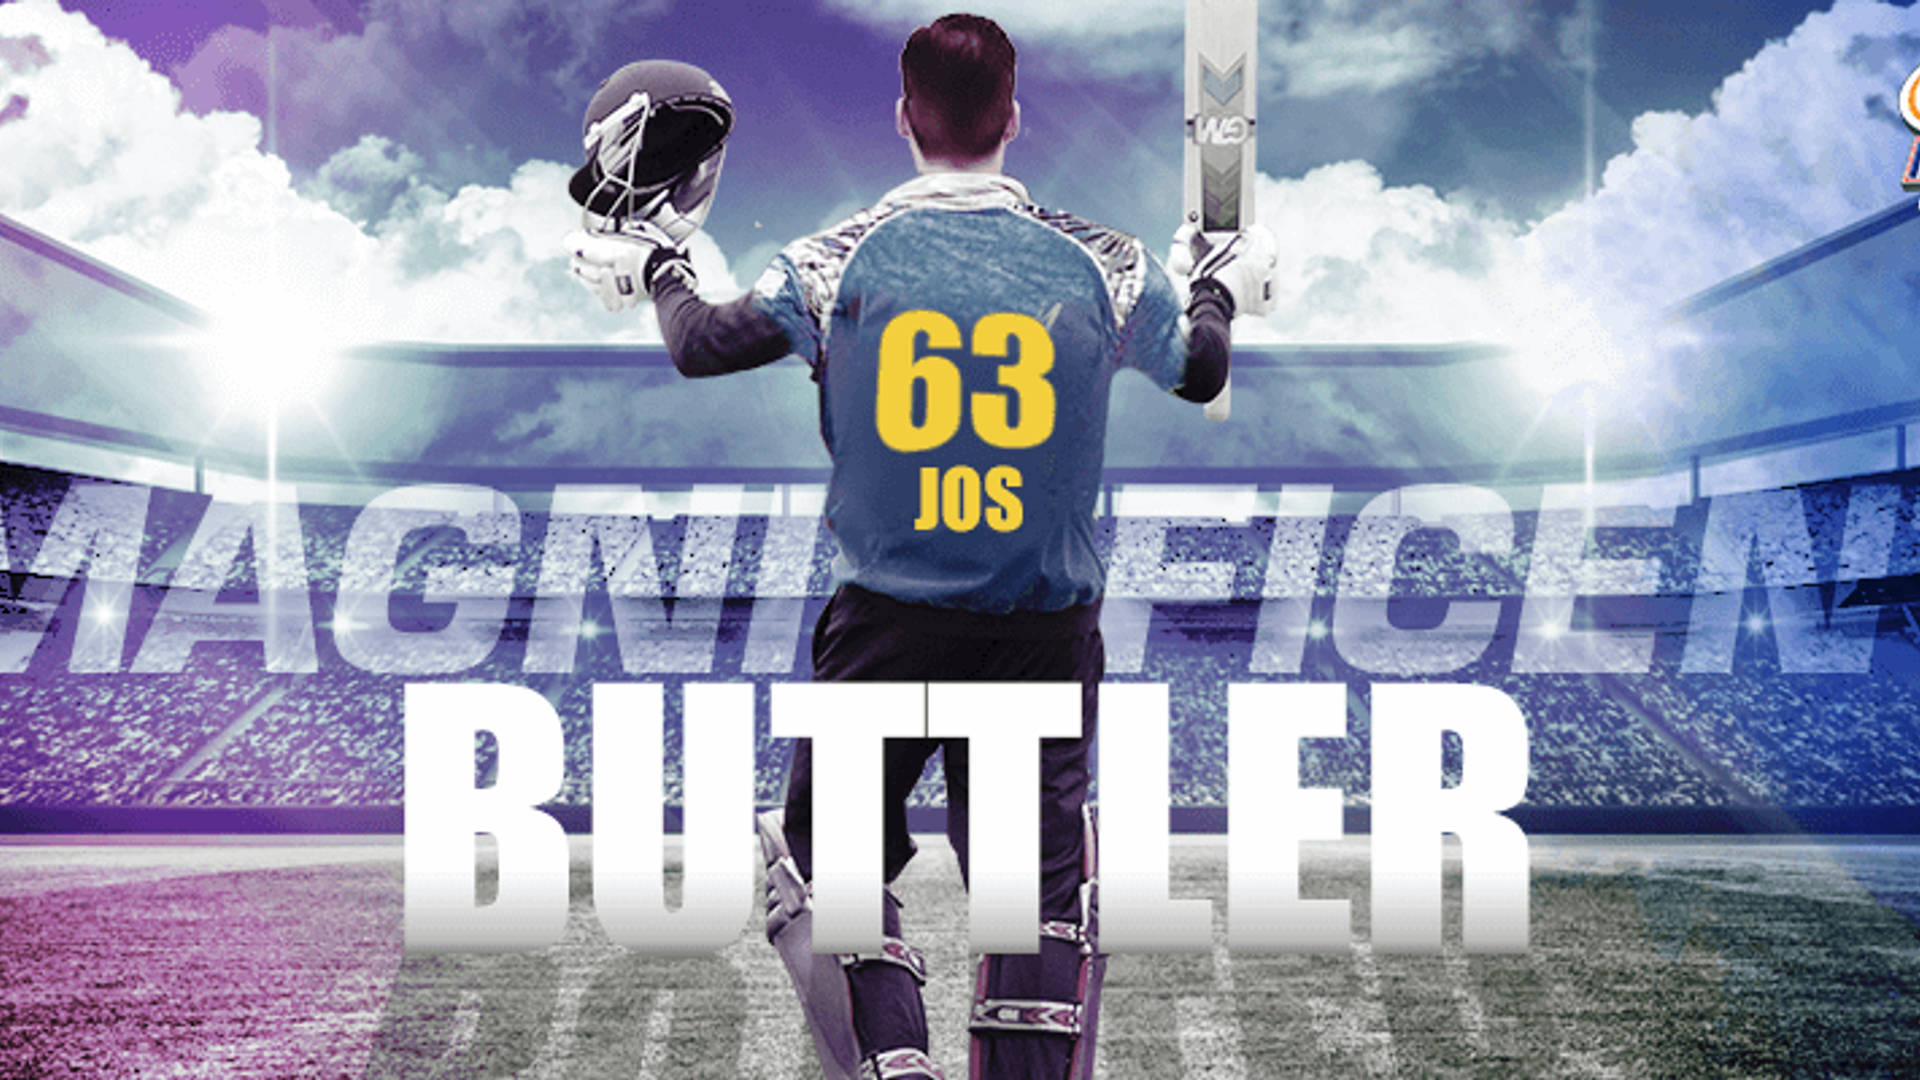 Magnificent Jos Buttler Poster Background